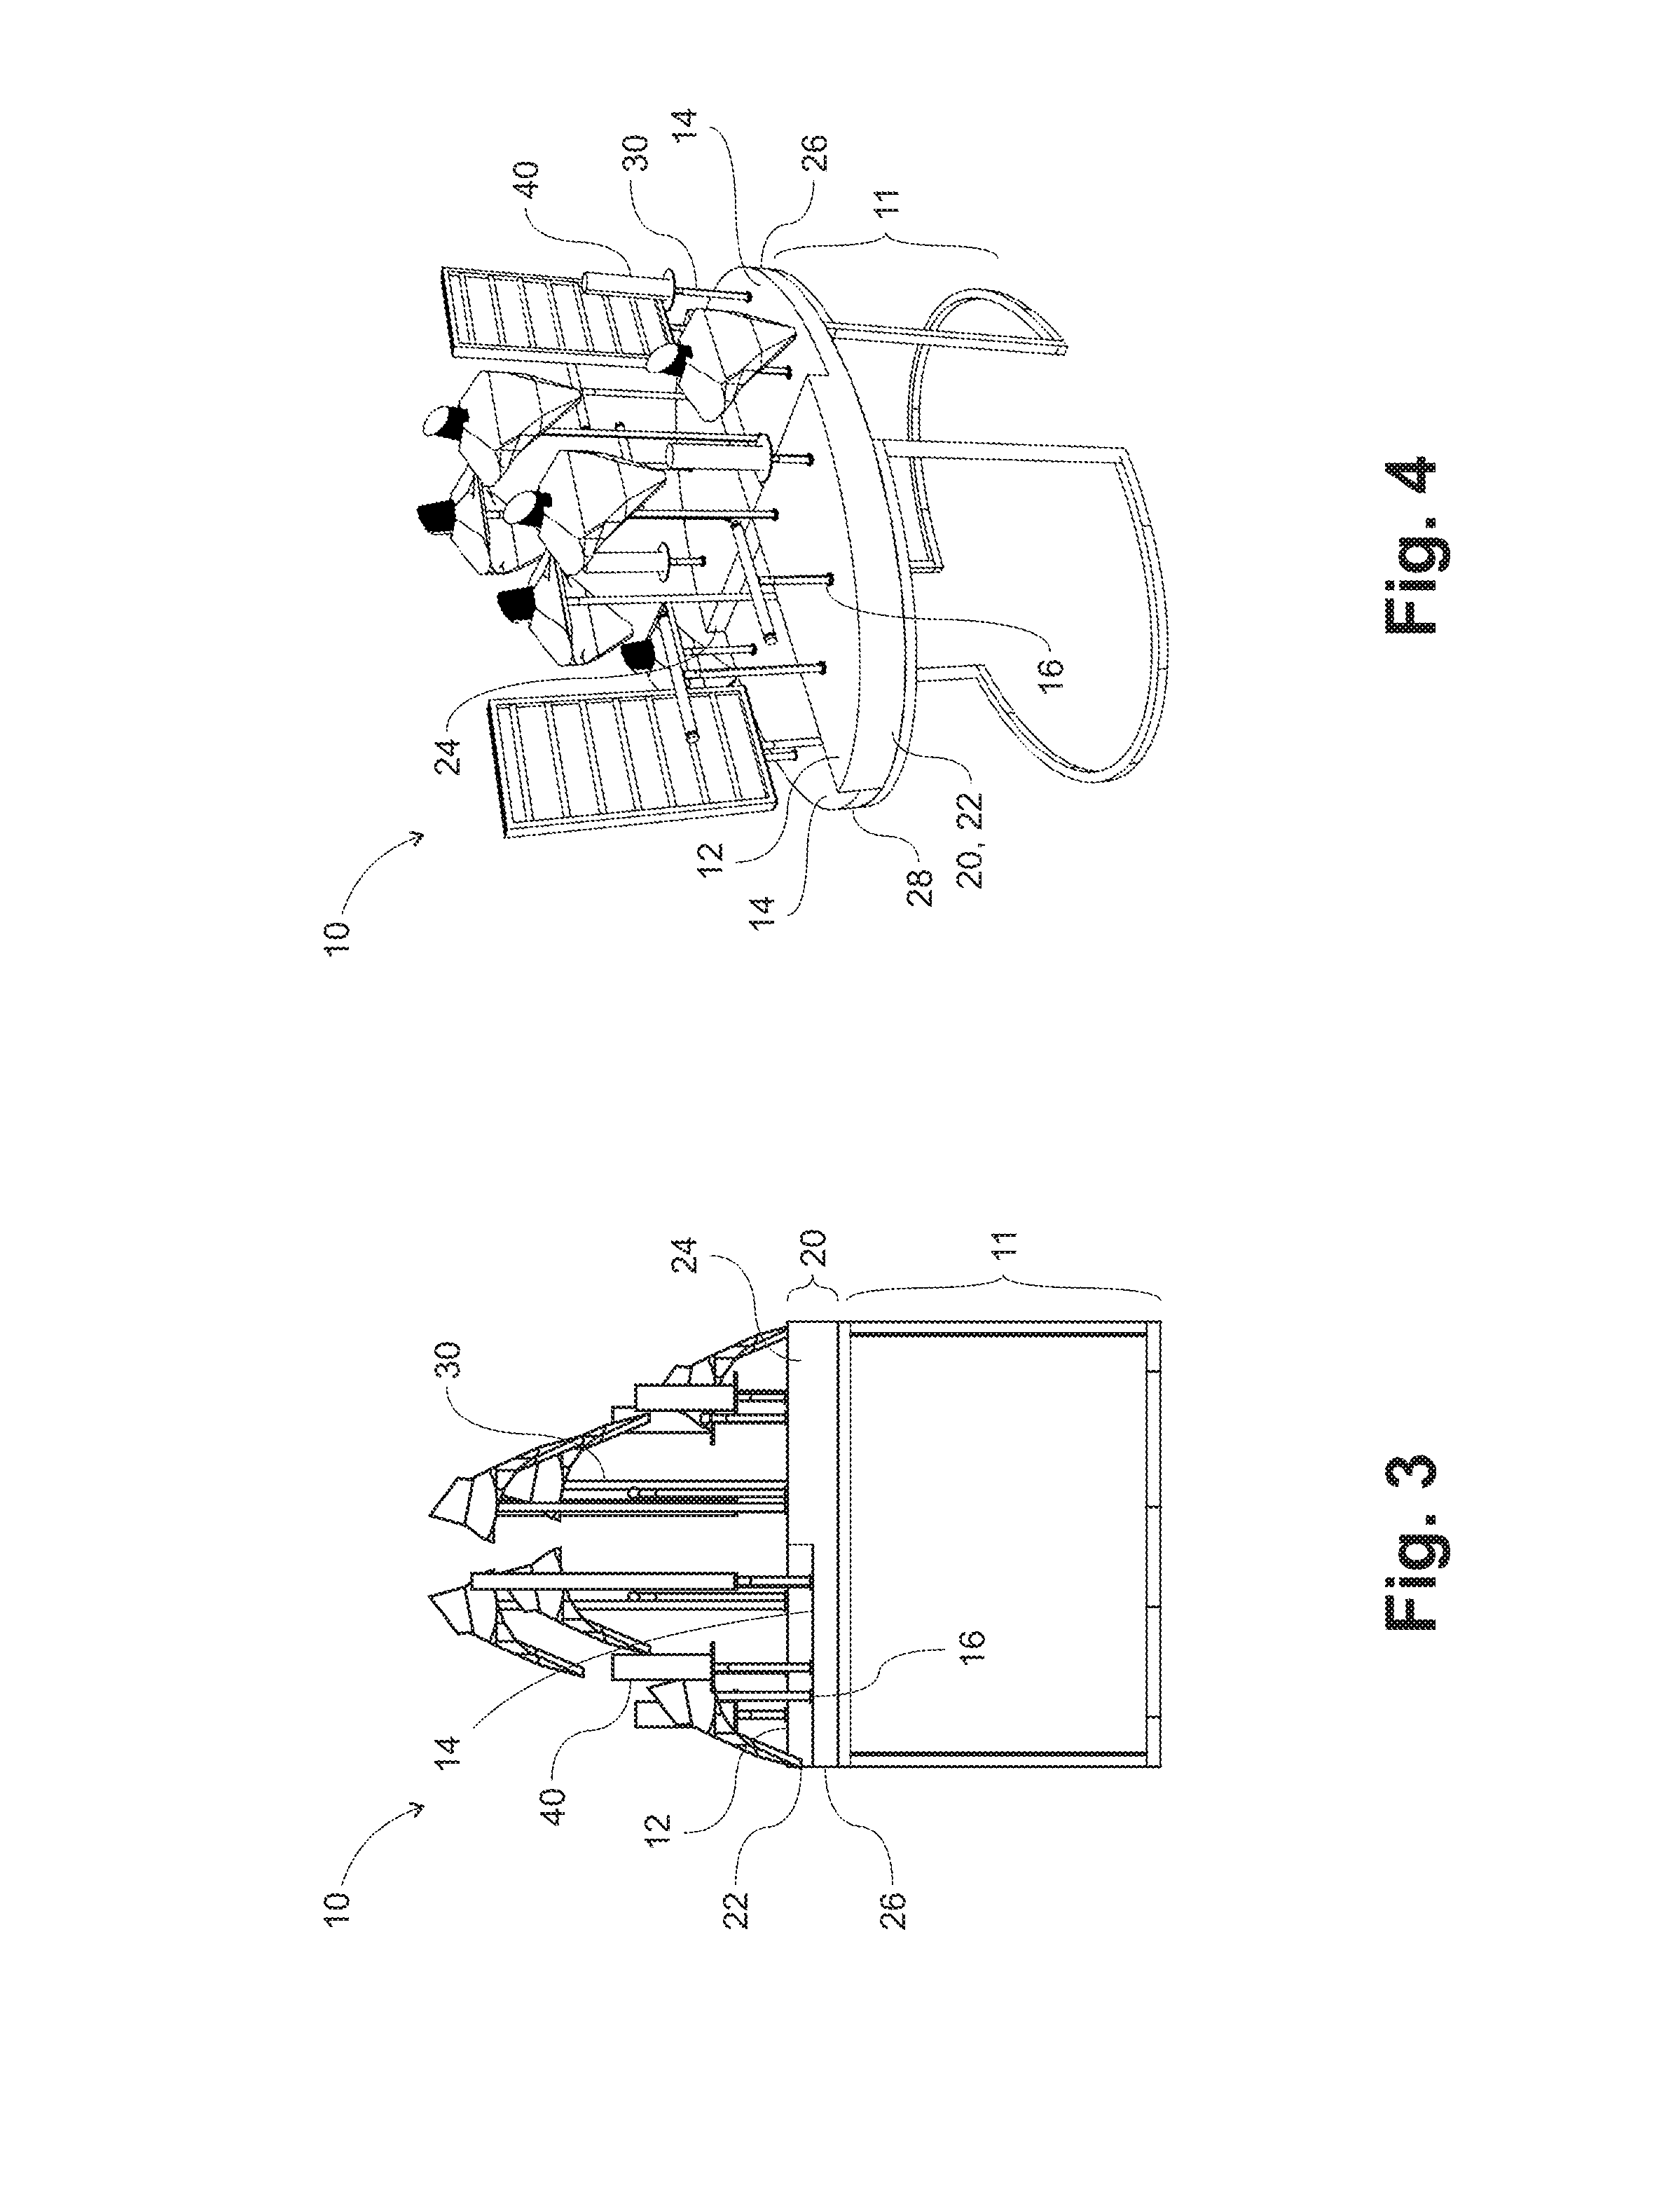 Interchangeable multi-level retail display and method thereof